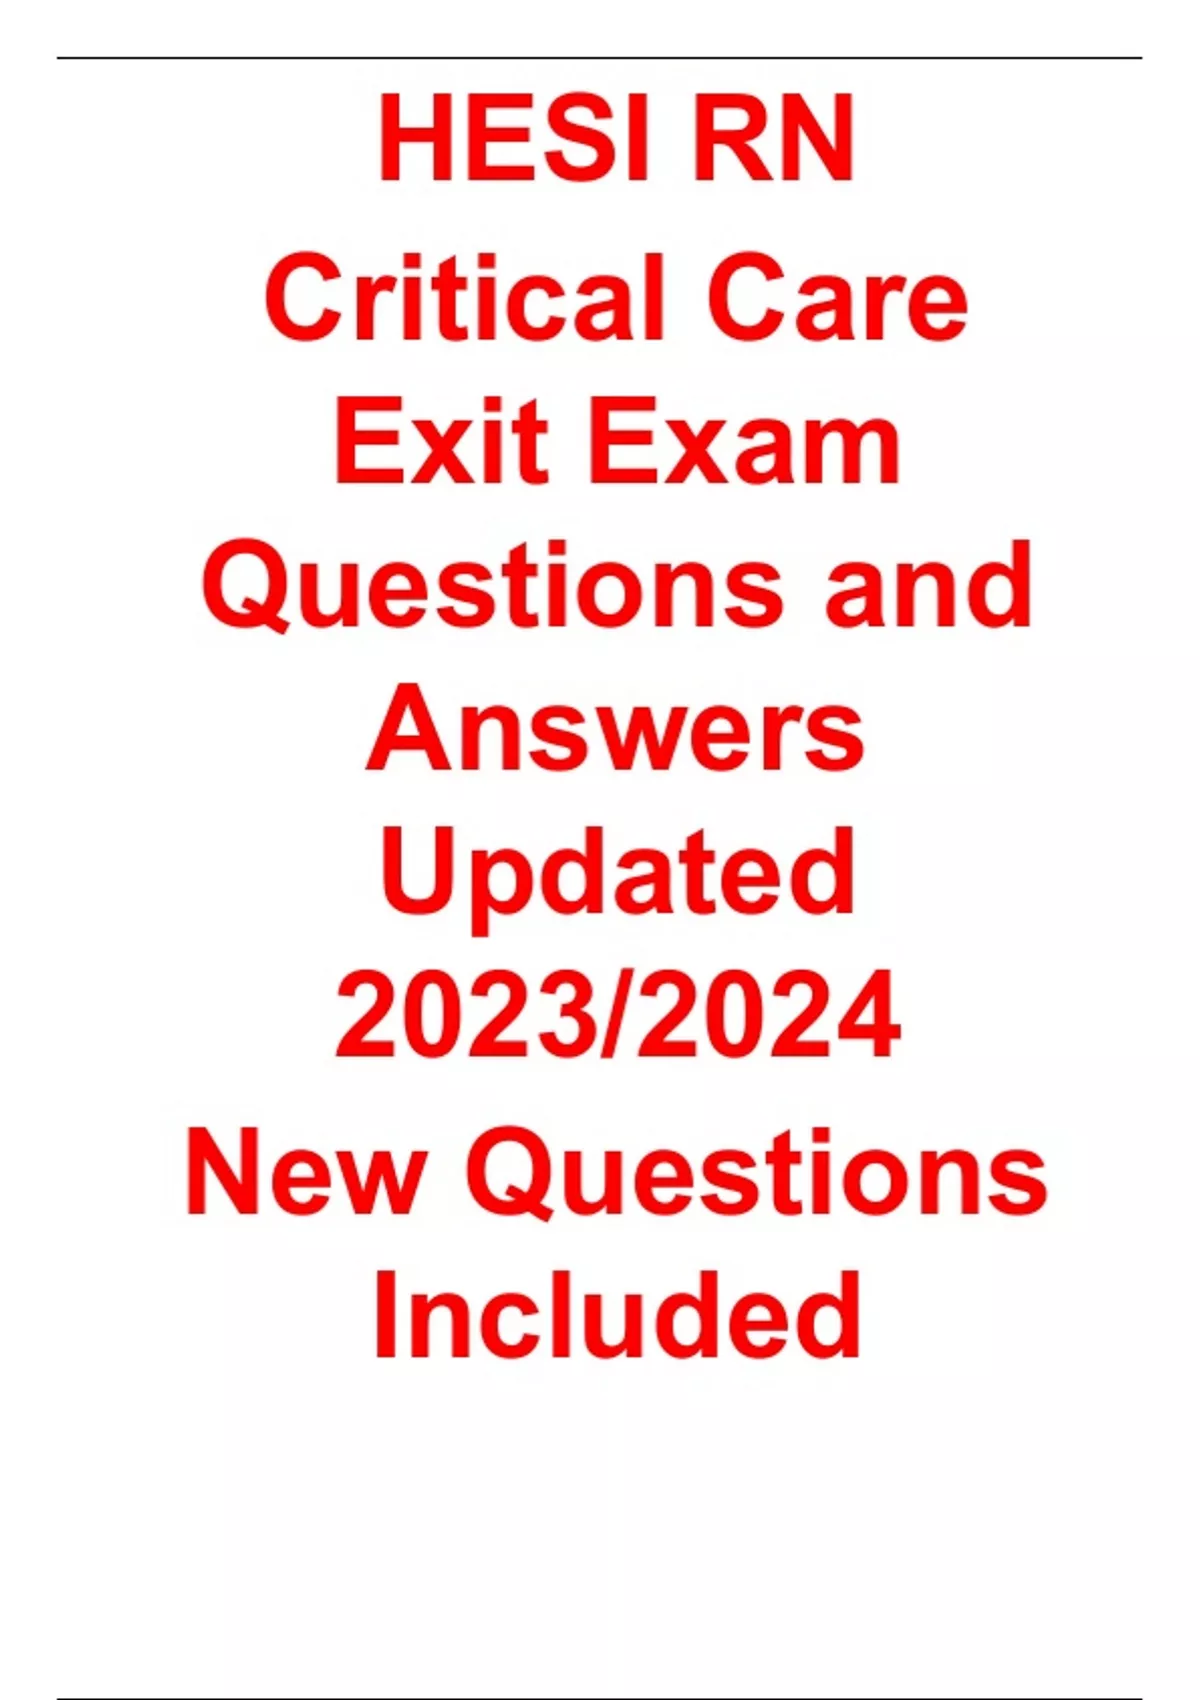 HESI RN Critical Care Exit Exam Questions and Answers Updated 2023/2024